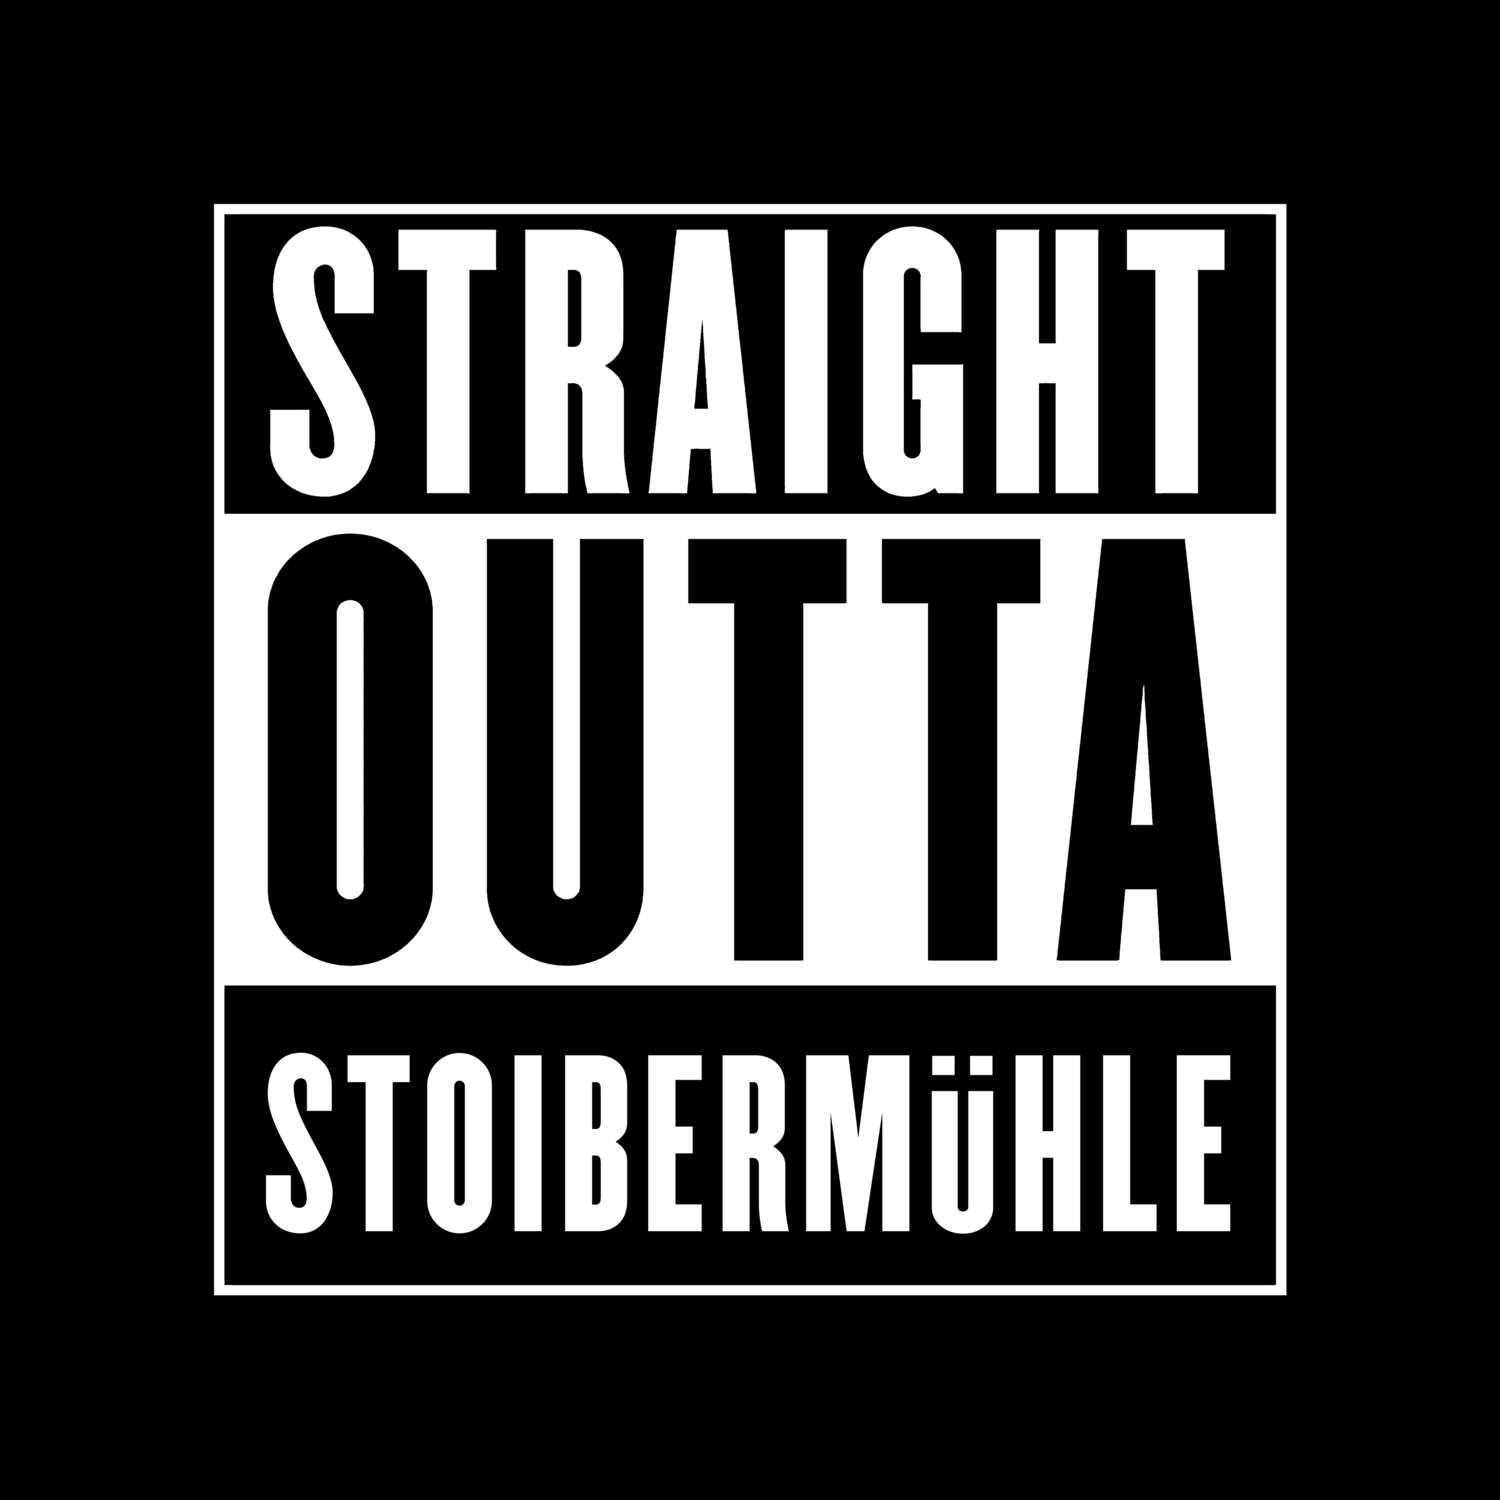 Stoibermühle T-Shirt »Straight Outta«